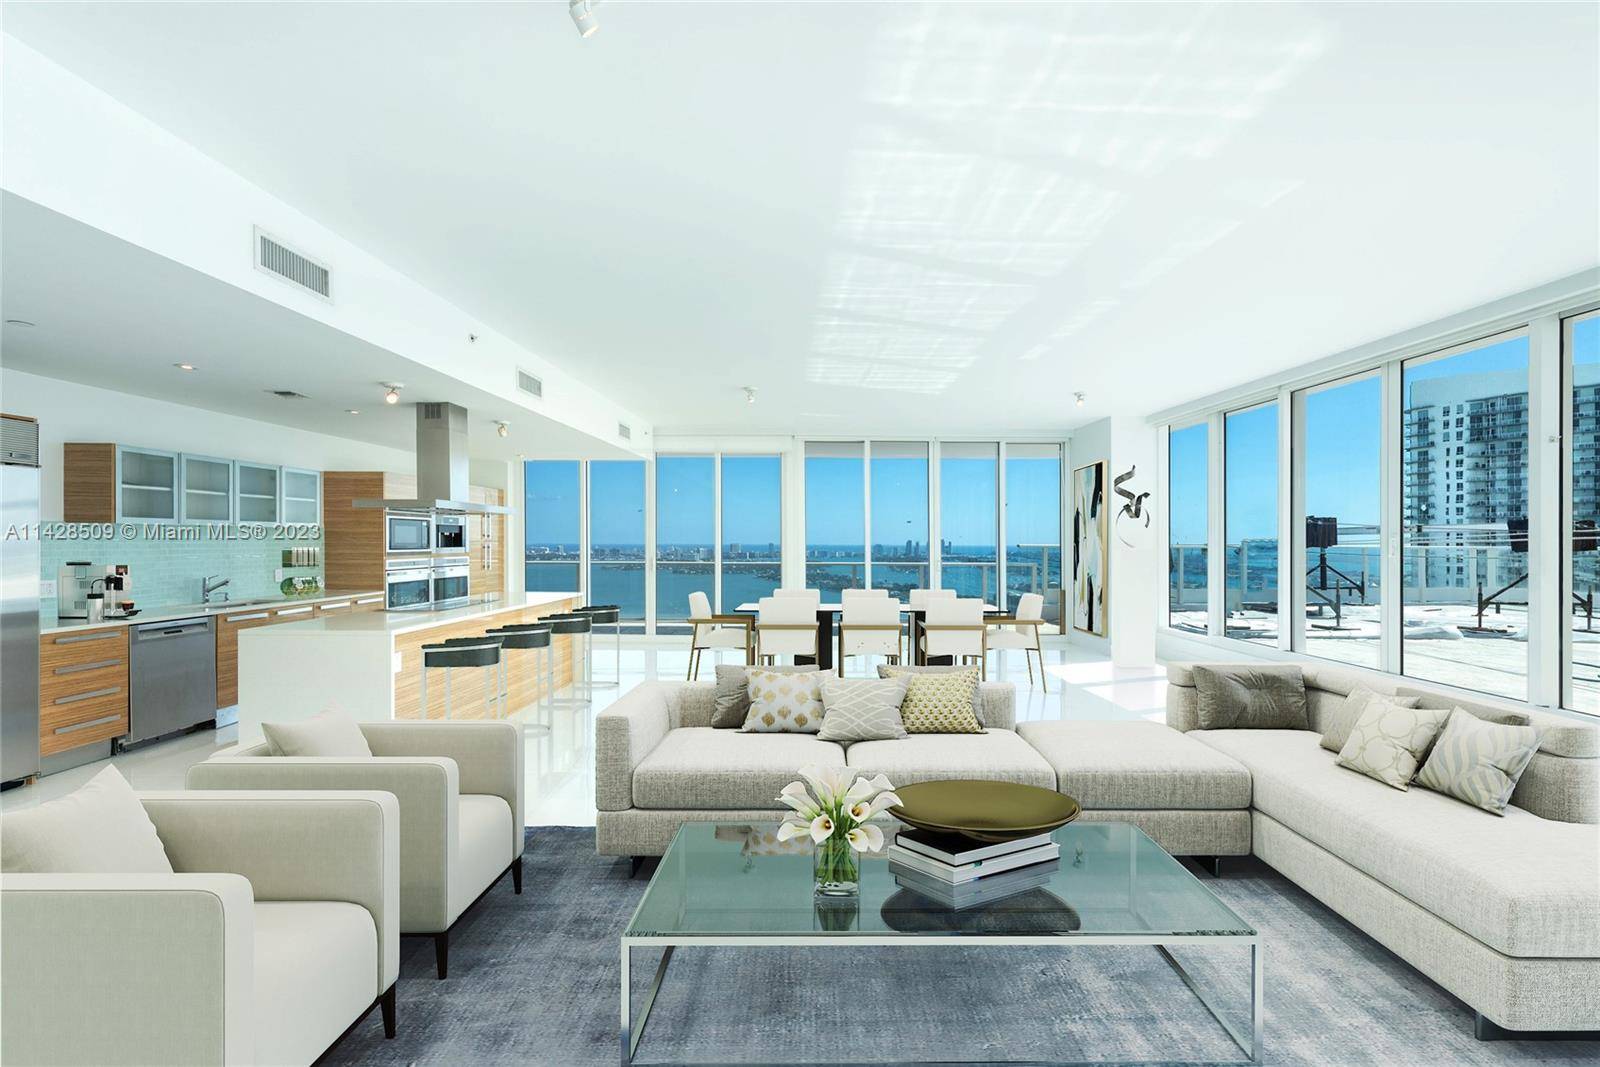 Rarely available, modern Penthouse in Paramount Bay Edgewater, with a private, 2, 000 sf terrace offering incredible views of Biscayne Bay, Downtown Miami skyline, and western sunset views.